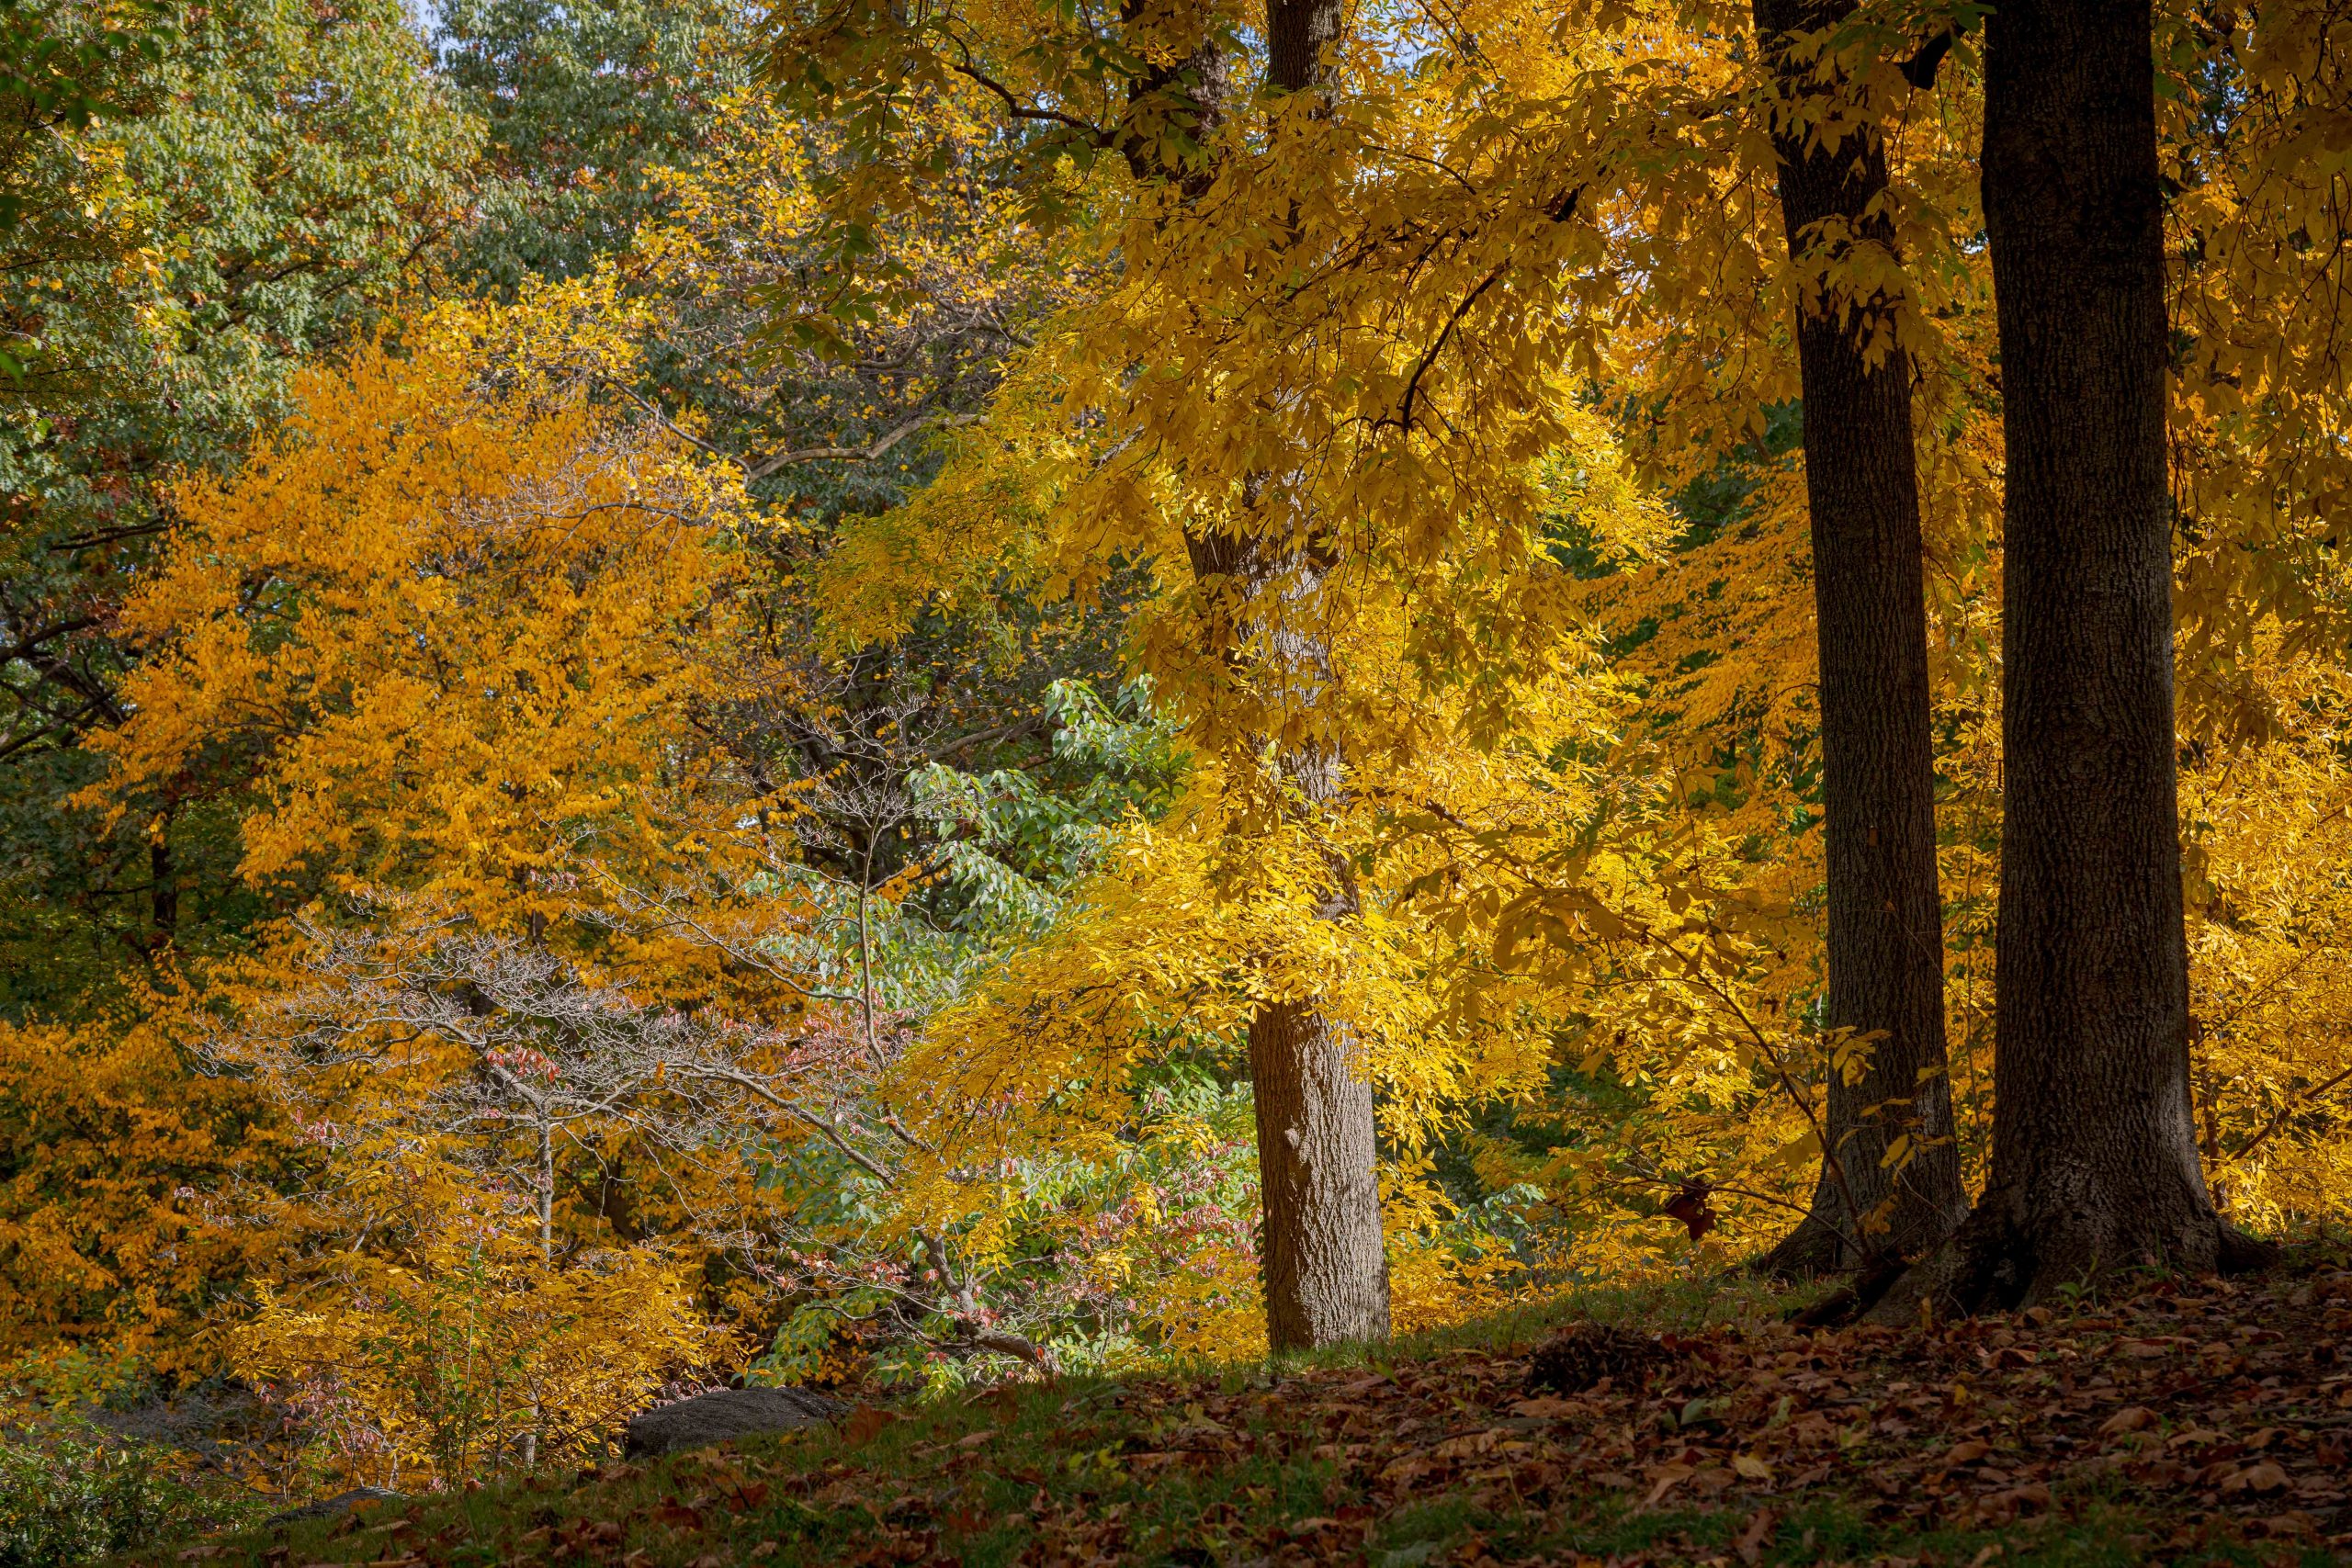 Yellow leaves fill the trees in this shady forest scene